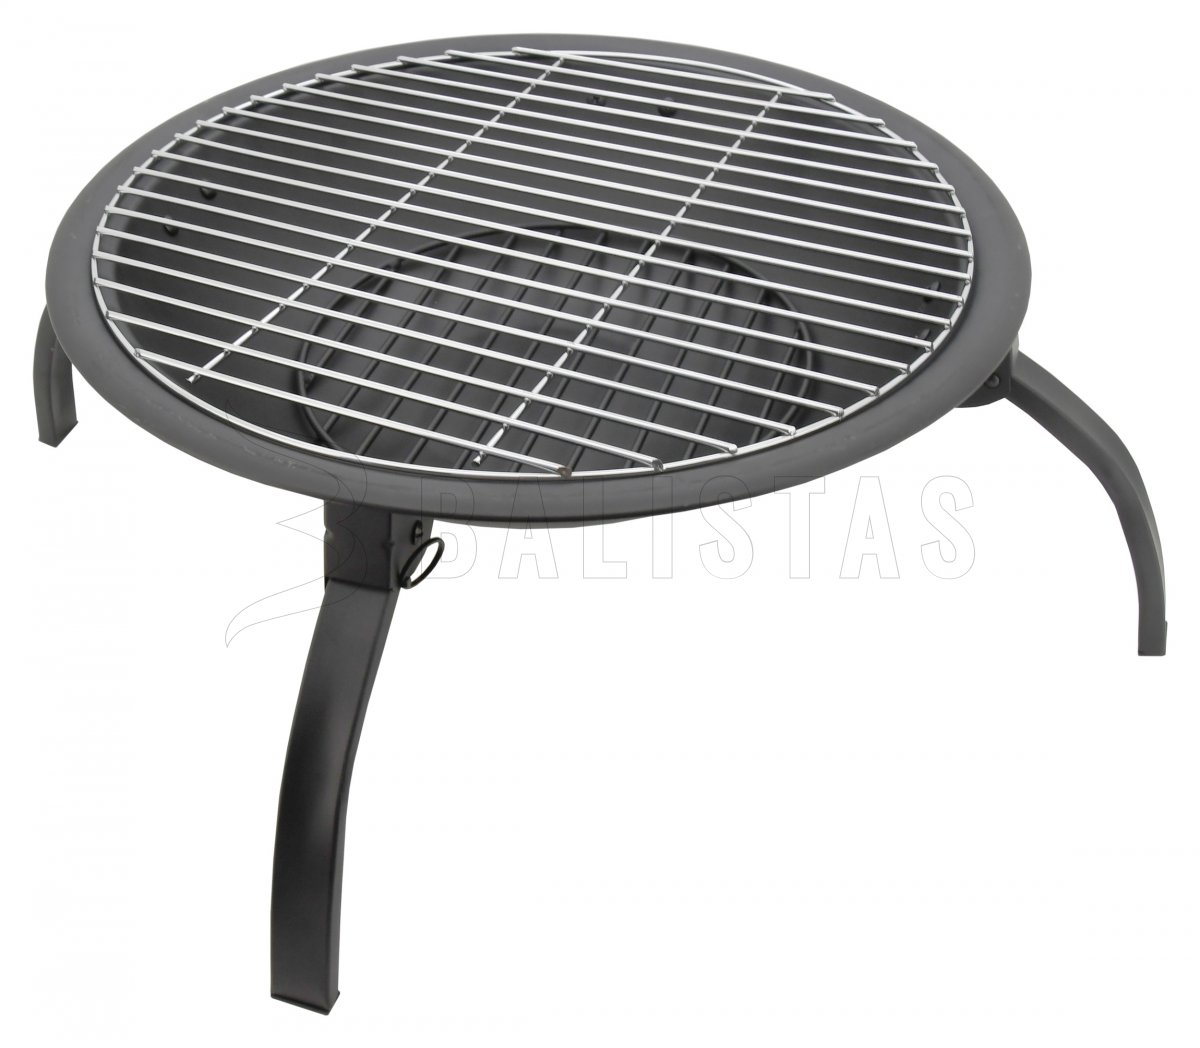 Fireplace with grill grate Vesuv with lid